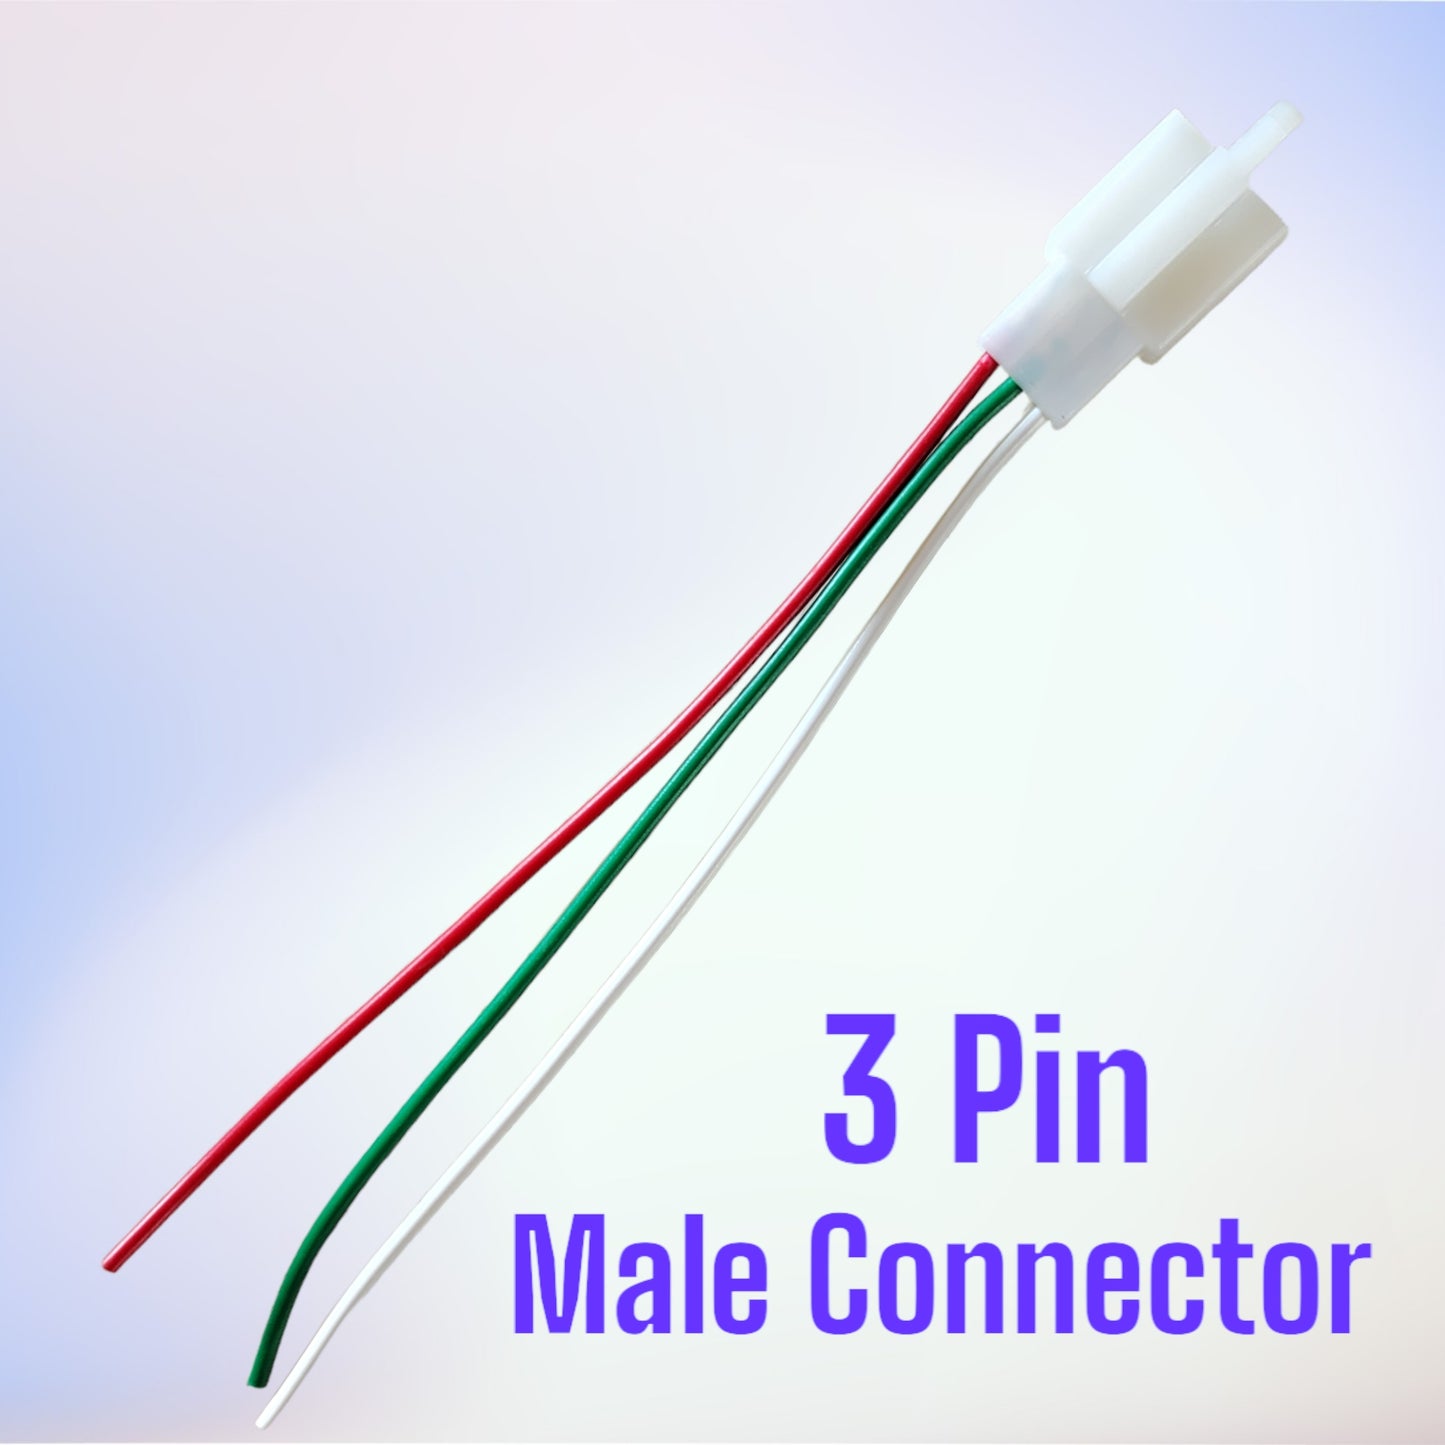 3 pin Male connector